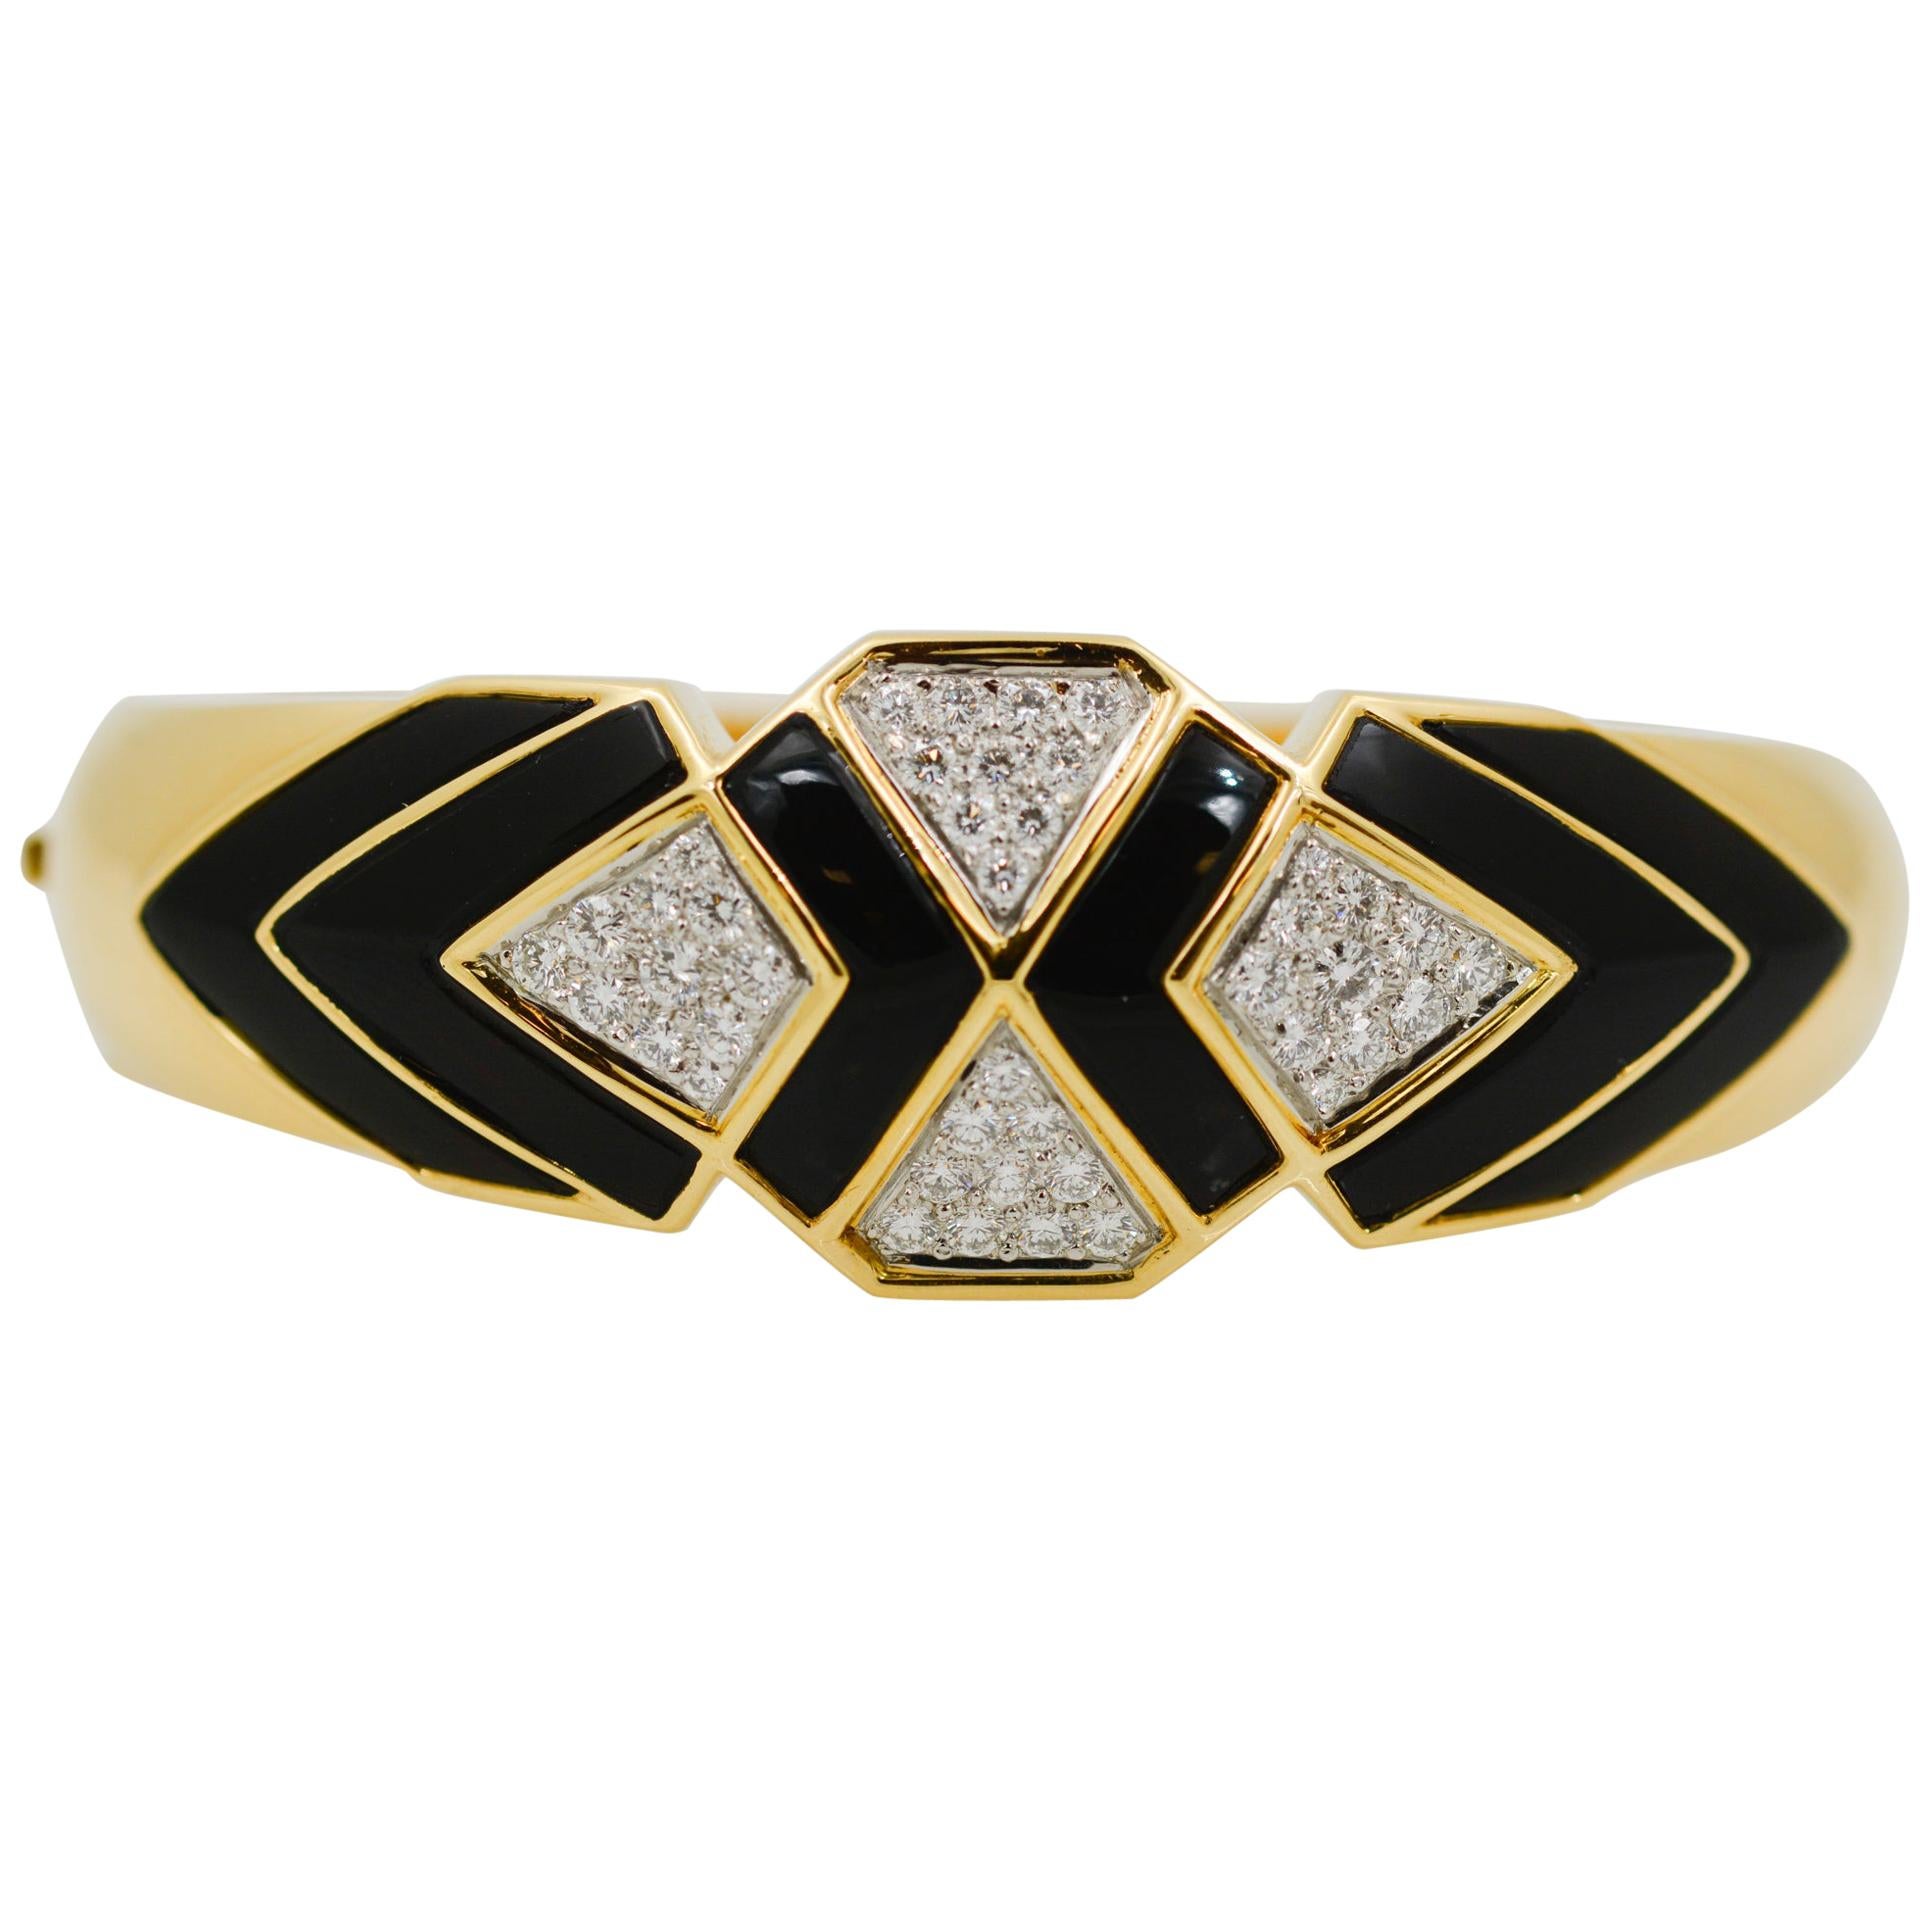 A bold black and white cuff crafted from 18k yellow gold featuring artfully cut geometric black onyx sections accenting angular sections of beautiful pave set diamonds. The stunning contrast of the black onyx against the white diamonds truly makes